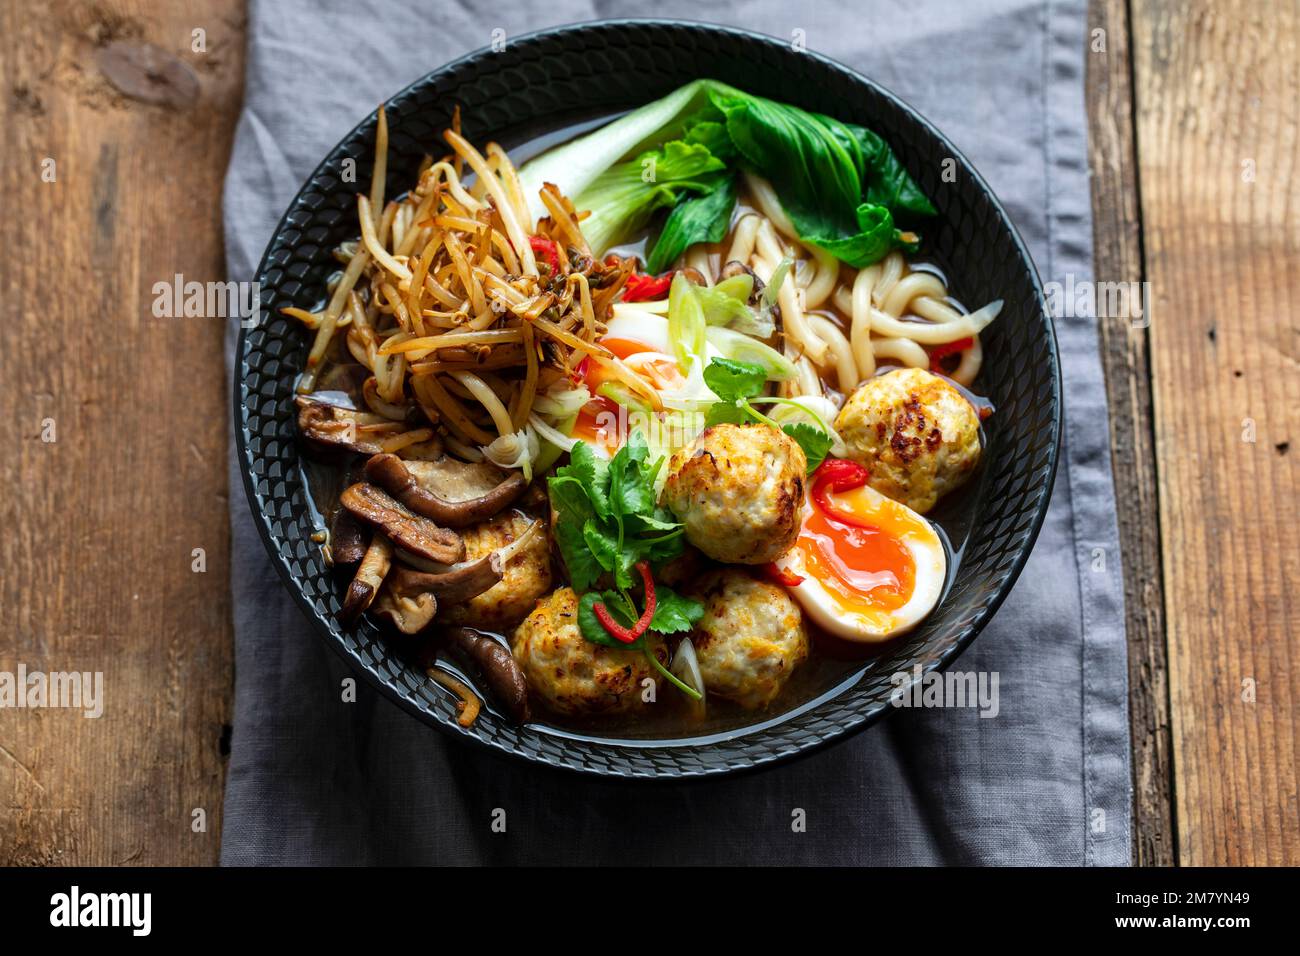 Ramen soup with meatballs and udon noodles Stock Photo